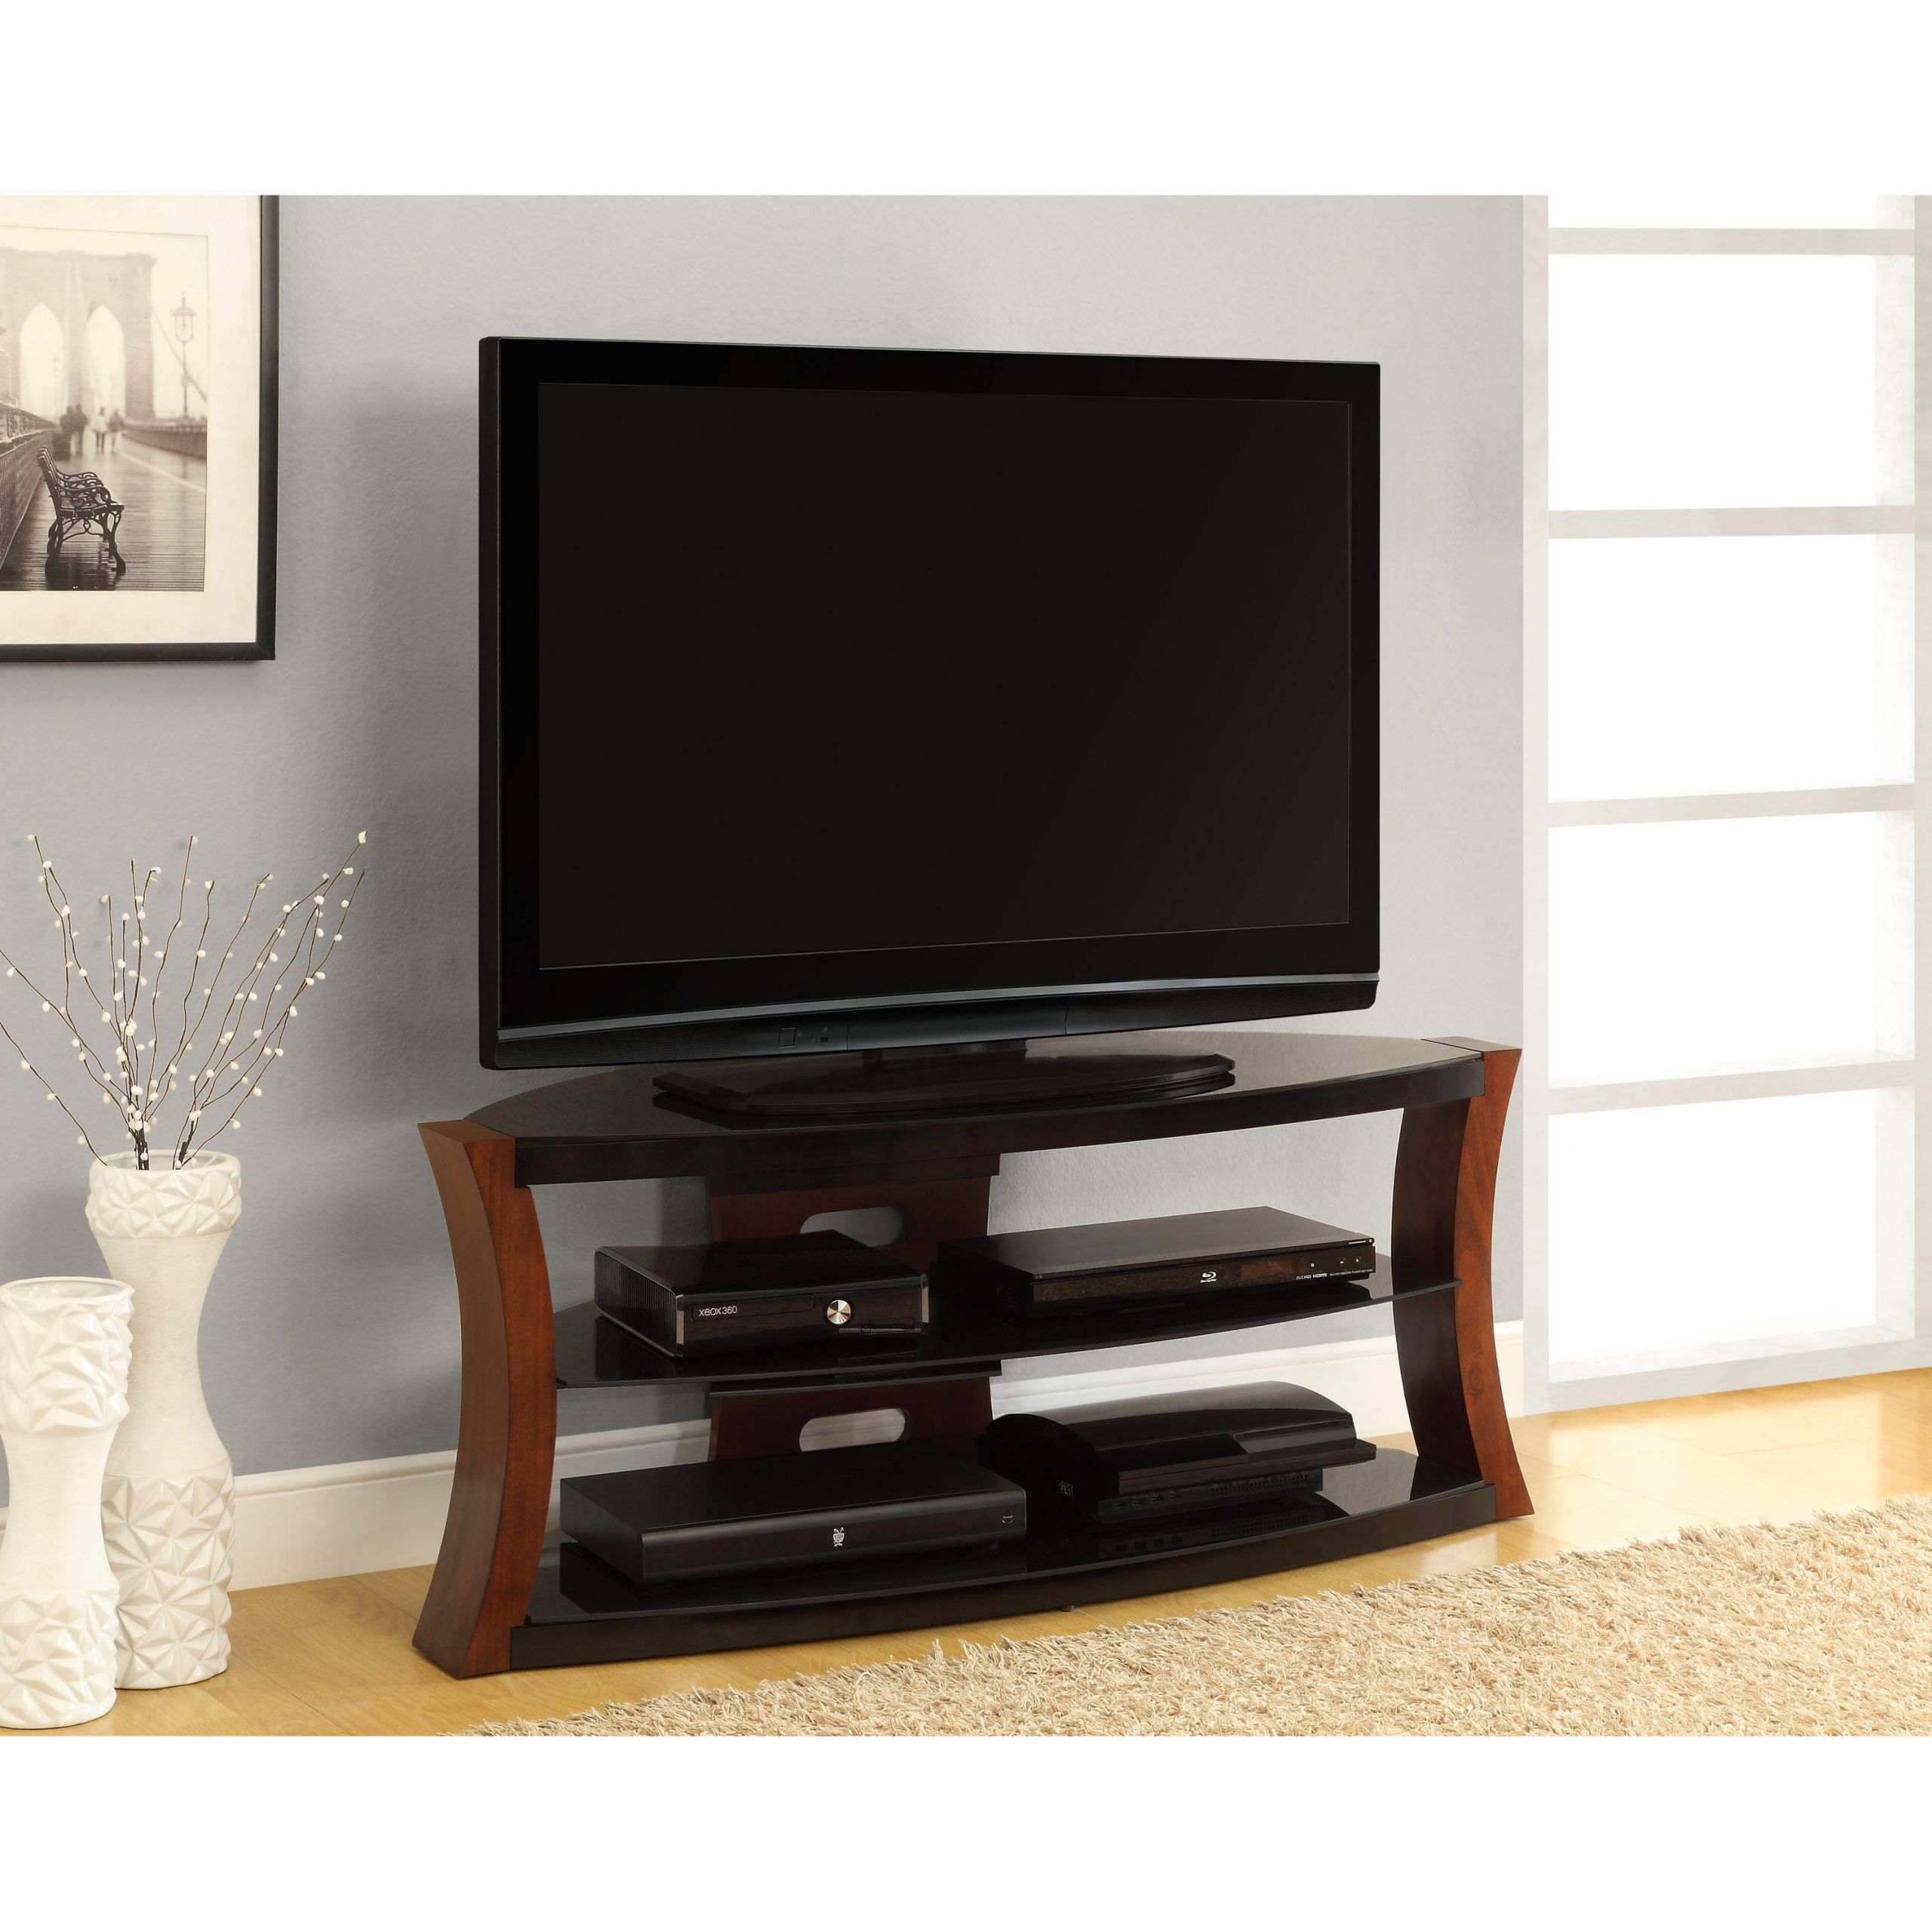 Tv Stands Recommendation – Homesfeed For Stylish Tv Stands (View 2 of 15)